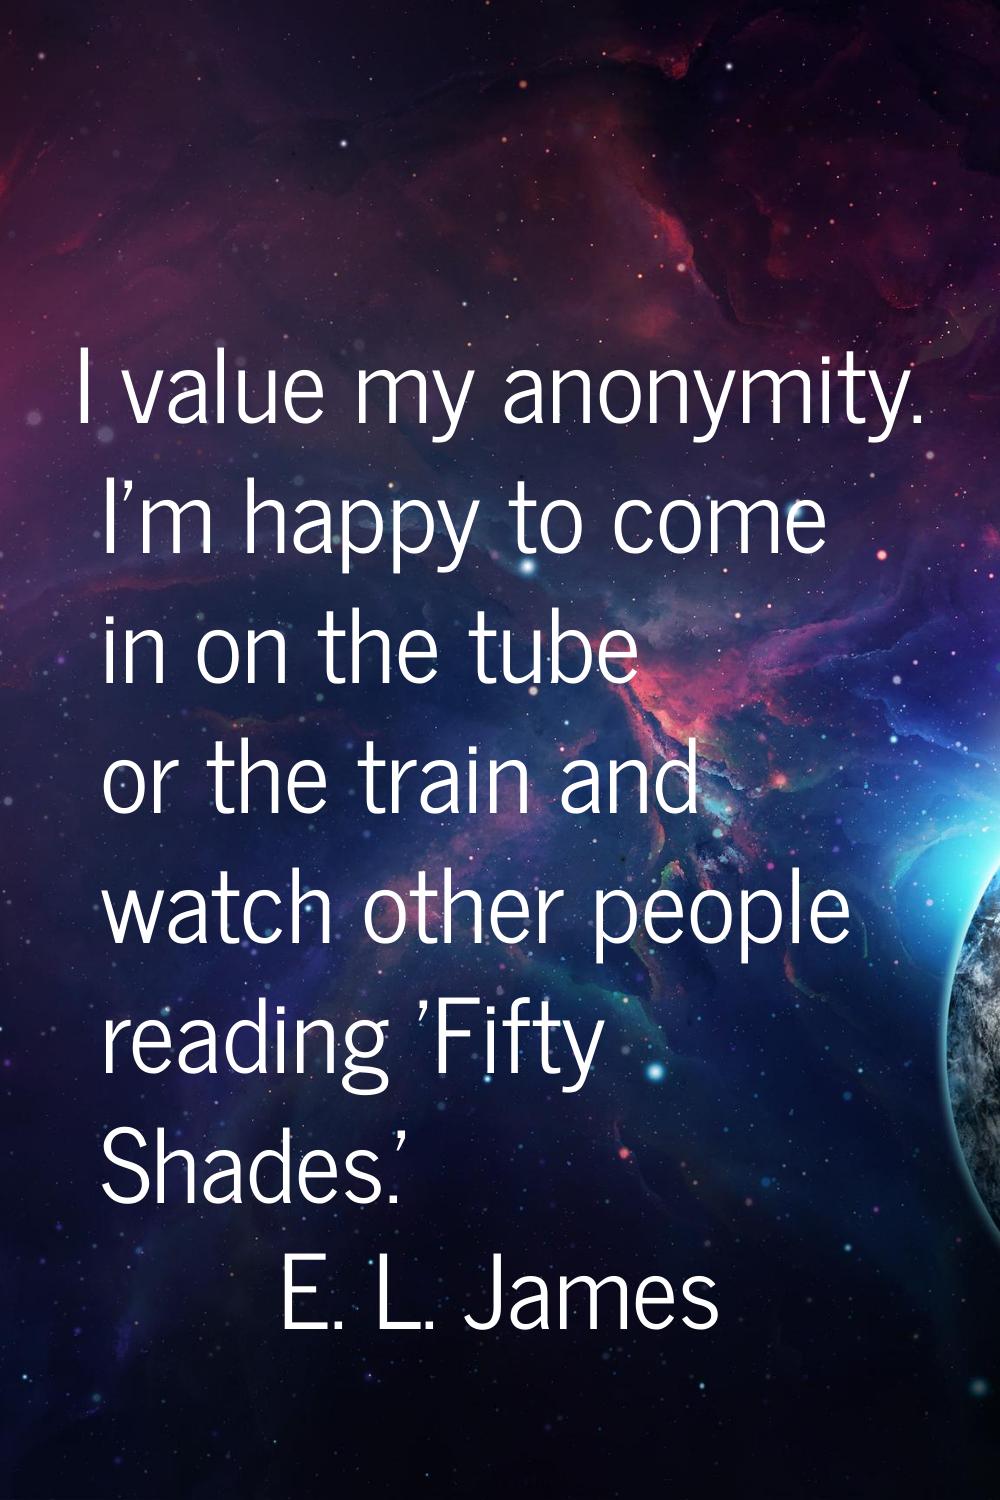 I value my anonymity. I'm happy to come in on the tube or the train and watch other people reading 